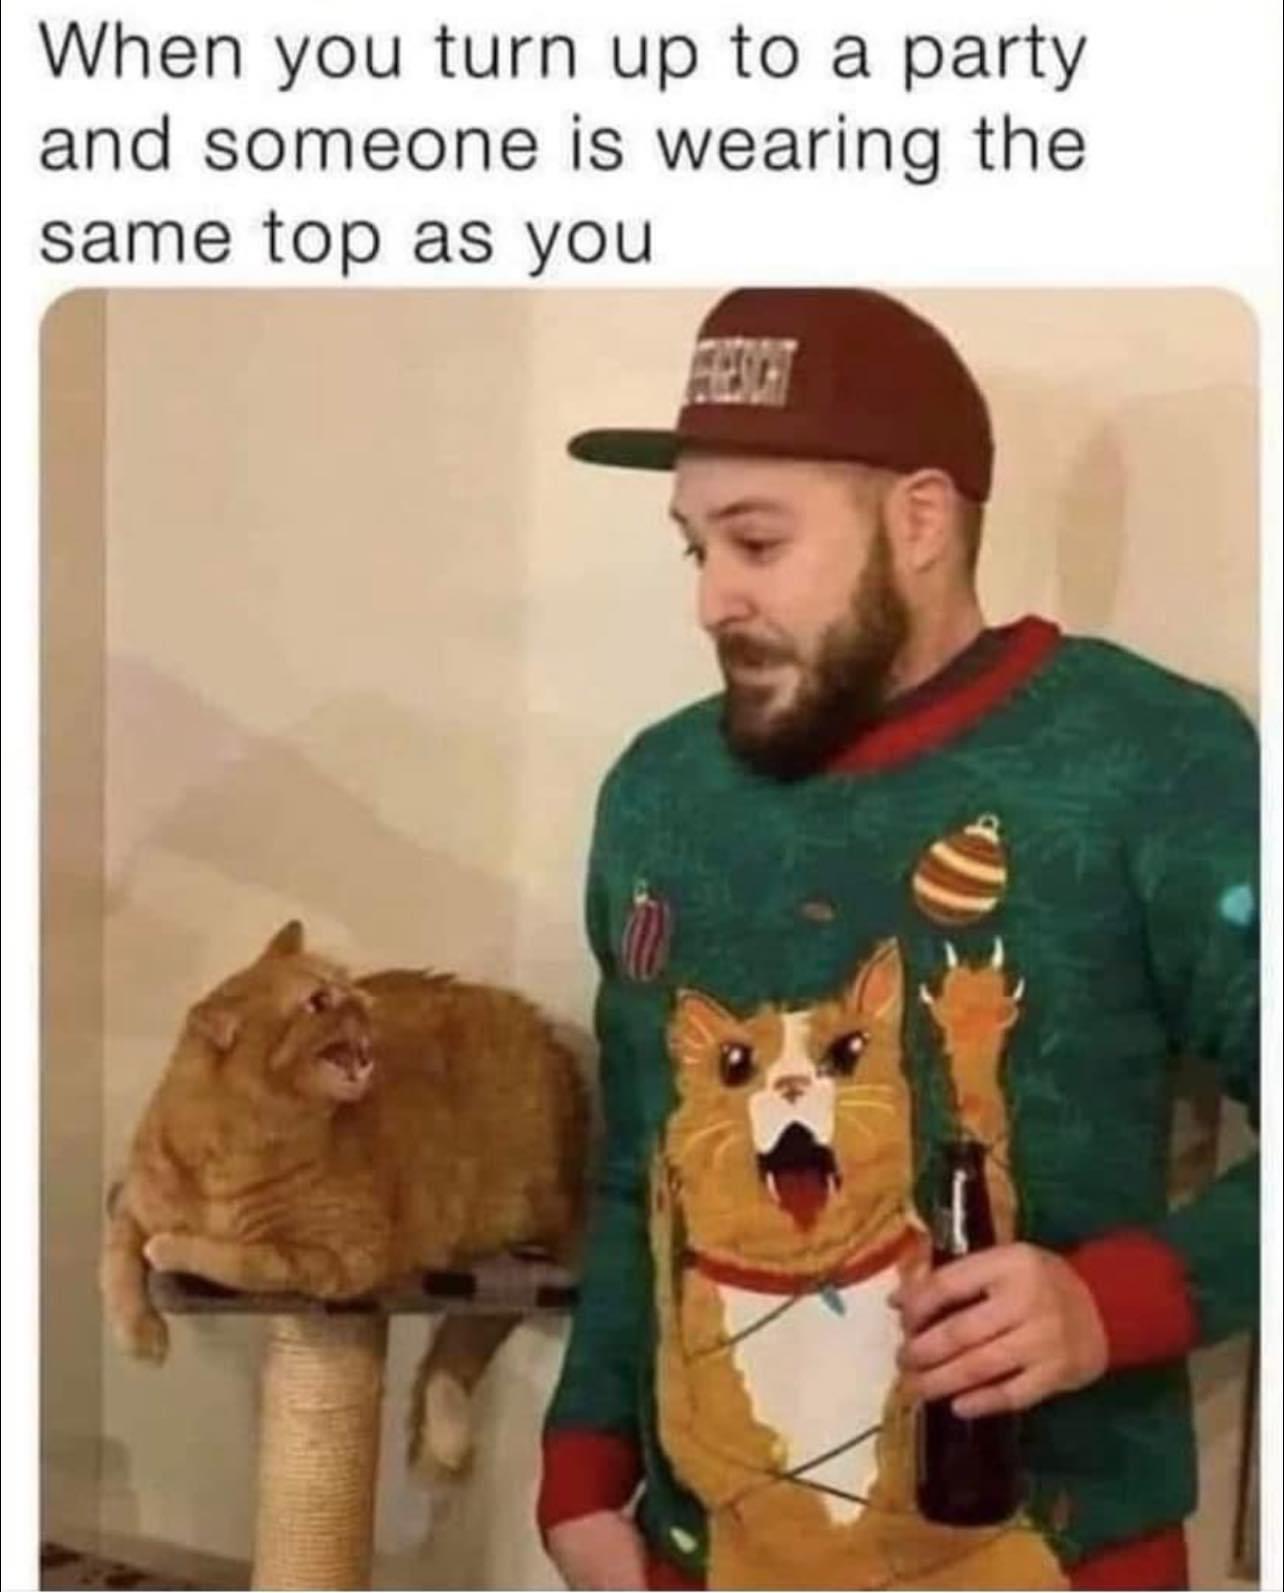 dank memes - funny memes - Tranjis Games - Cat Tower - Table Game (TRG-06cat) - When you turn up to a party and someone is wearing the same top as you 0